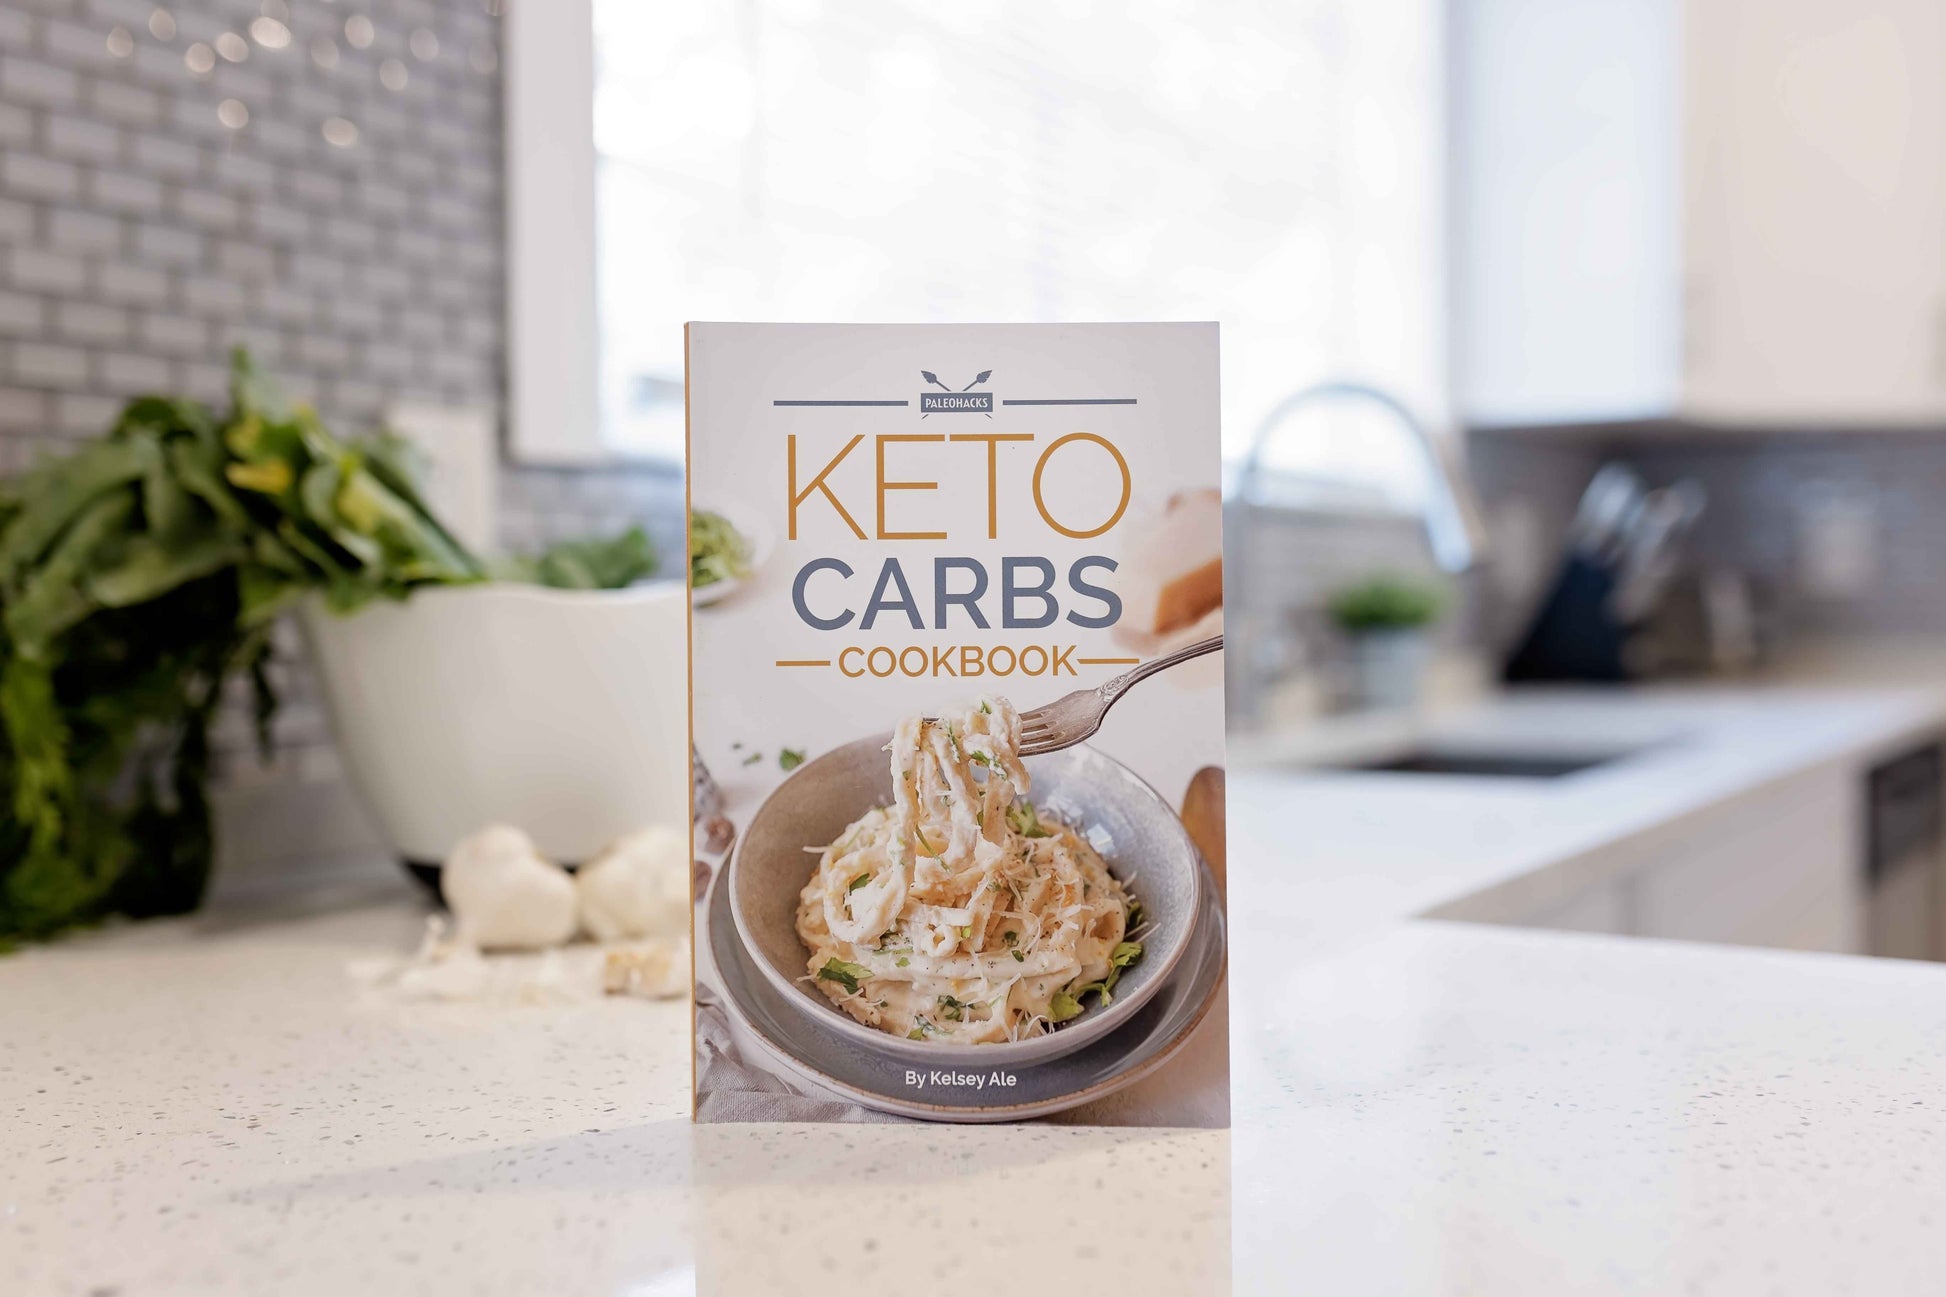 Keto Carbs Cookbook rest on a grey marble surface. A bowl of vegetables can be seen behind.